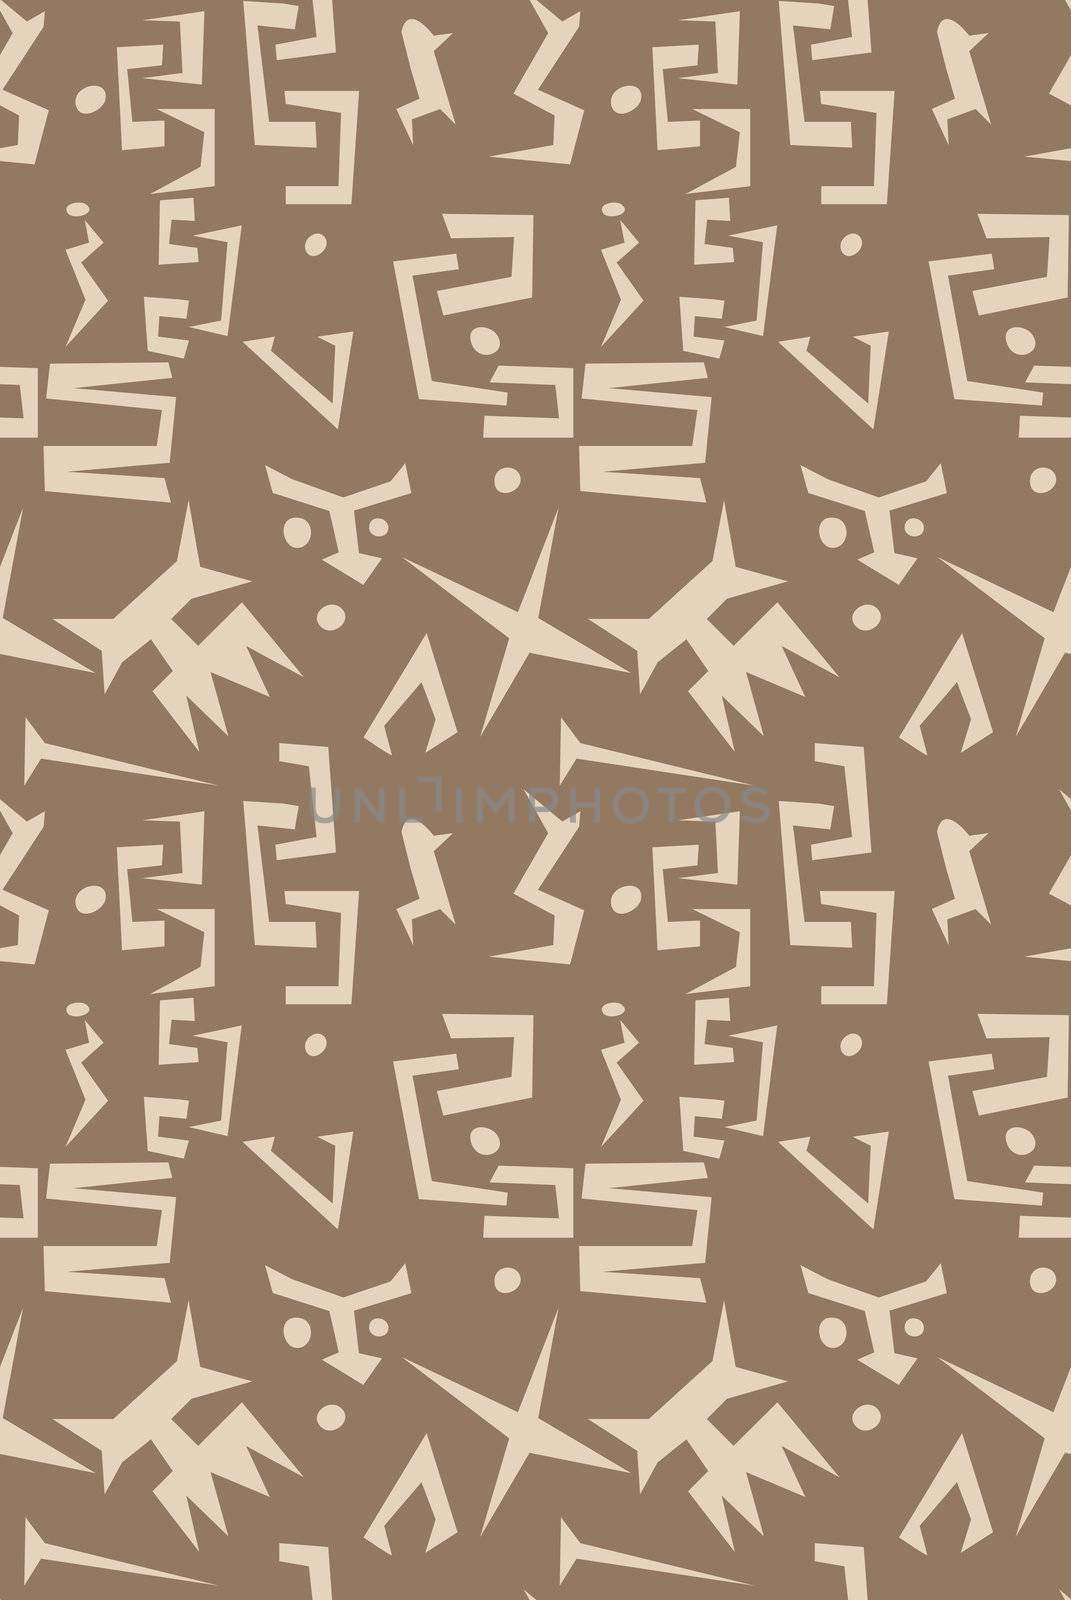 Primitive ancient animal and human seamless shapes pattern